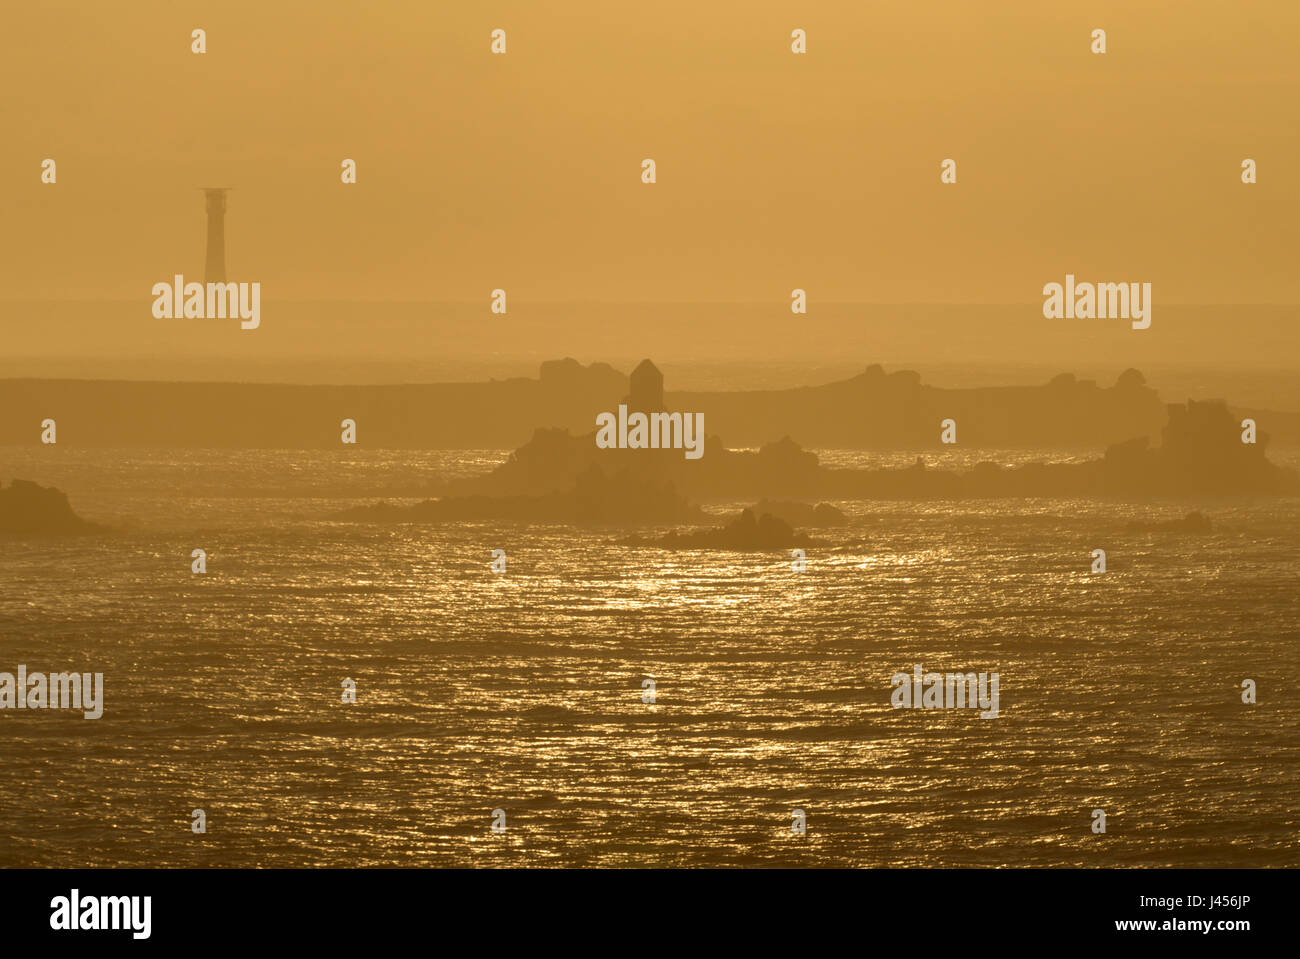 Bishop Rock Lighthouse and the western isles from St Agnes, Isles of Scilly, UK Stock Photo